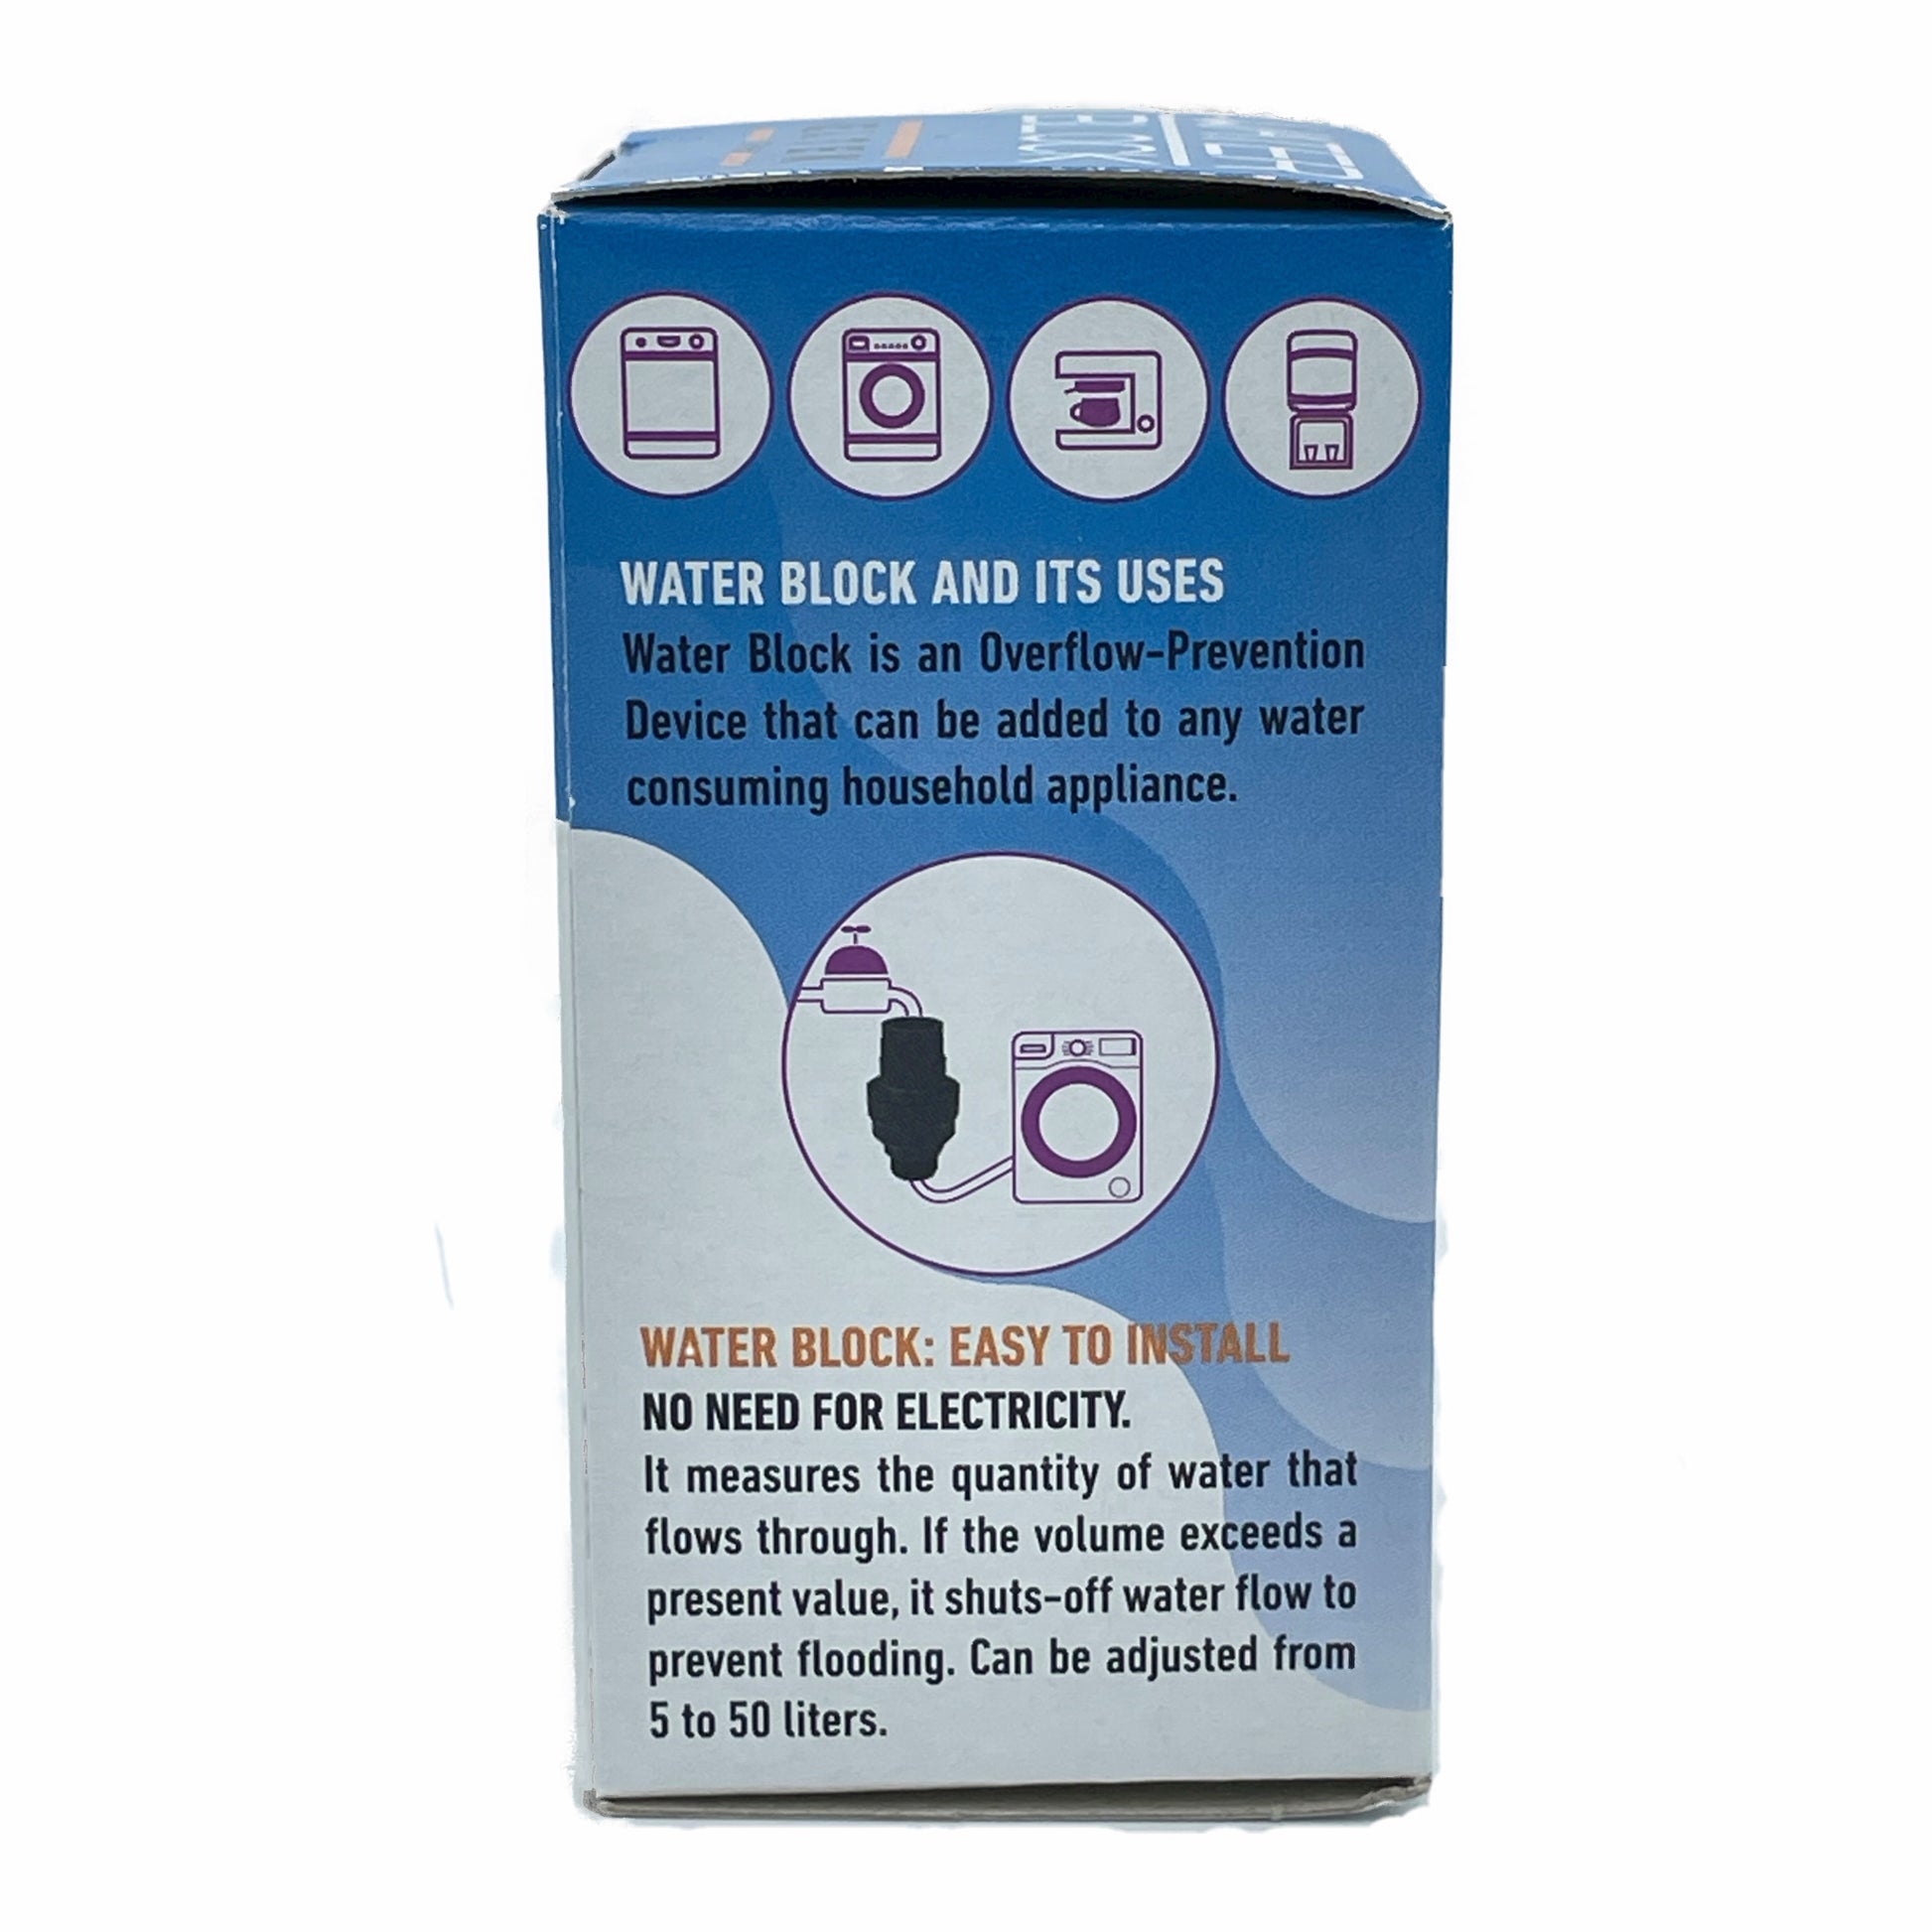 Picture of the Water Block packaging with a brief description. The water block measures the quantity of water that flows through. If the volume exceeds a present value, it shuts-off water flow to prevent flooding. It can be adjusted from 1.3 to 13 gallons.